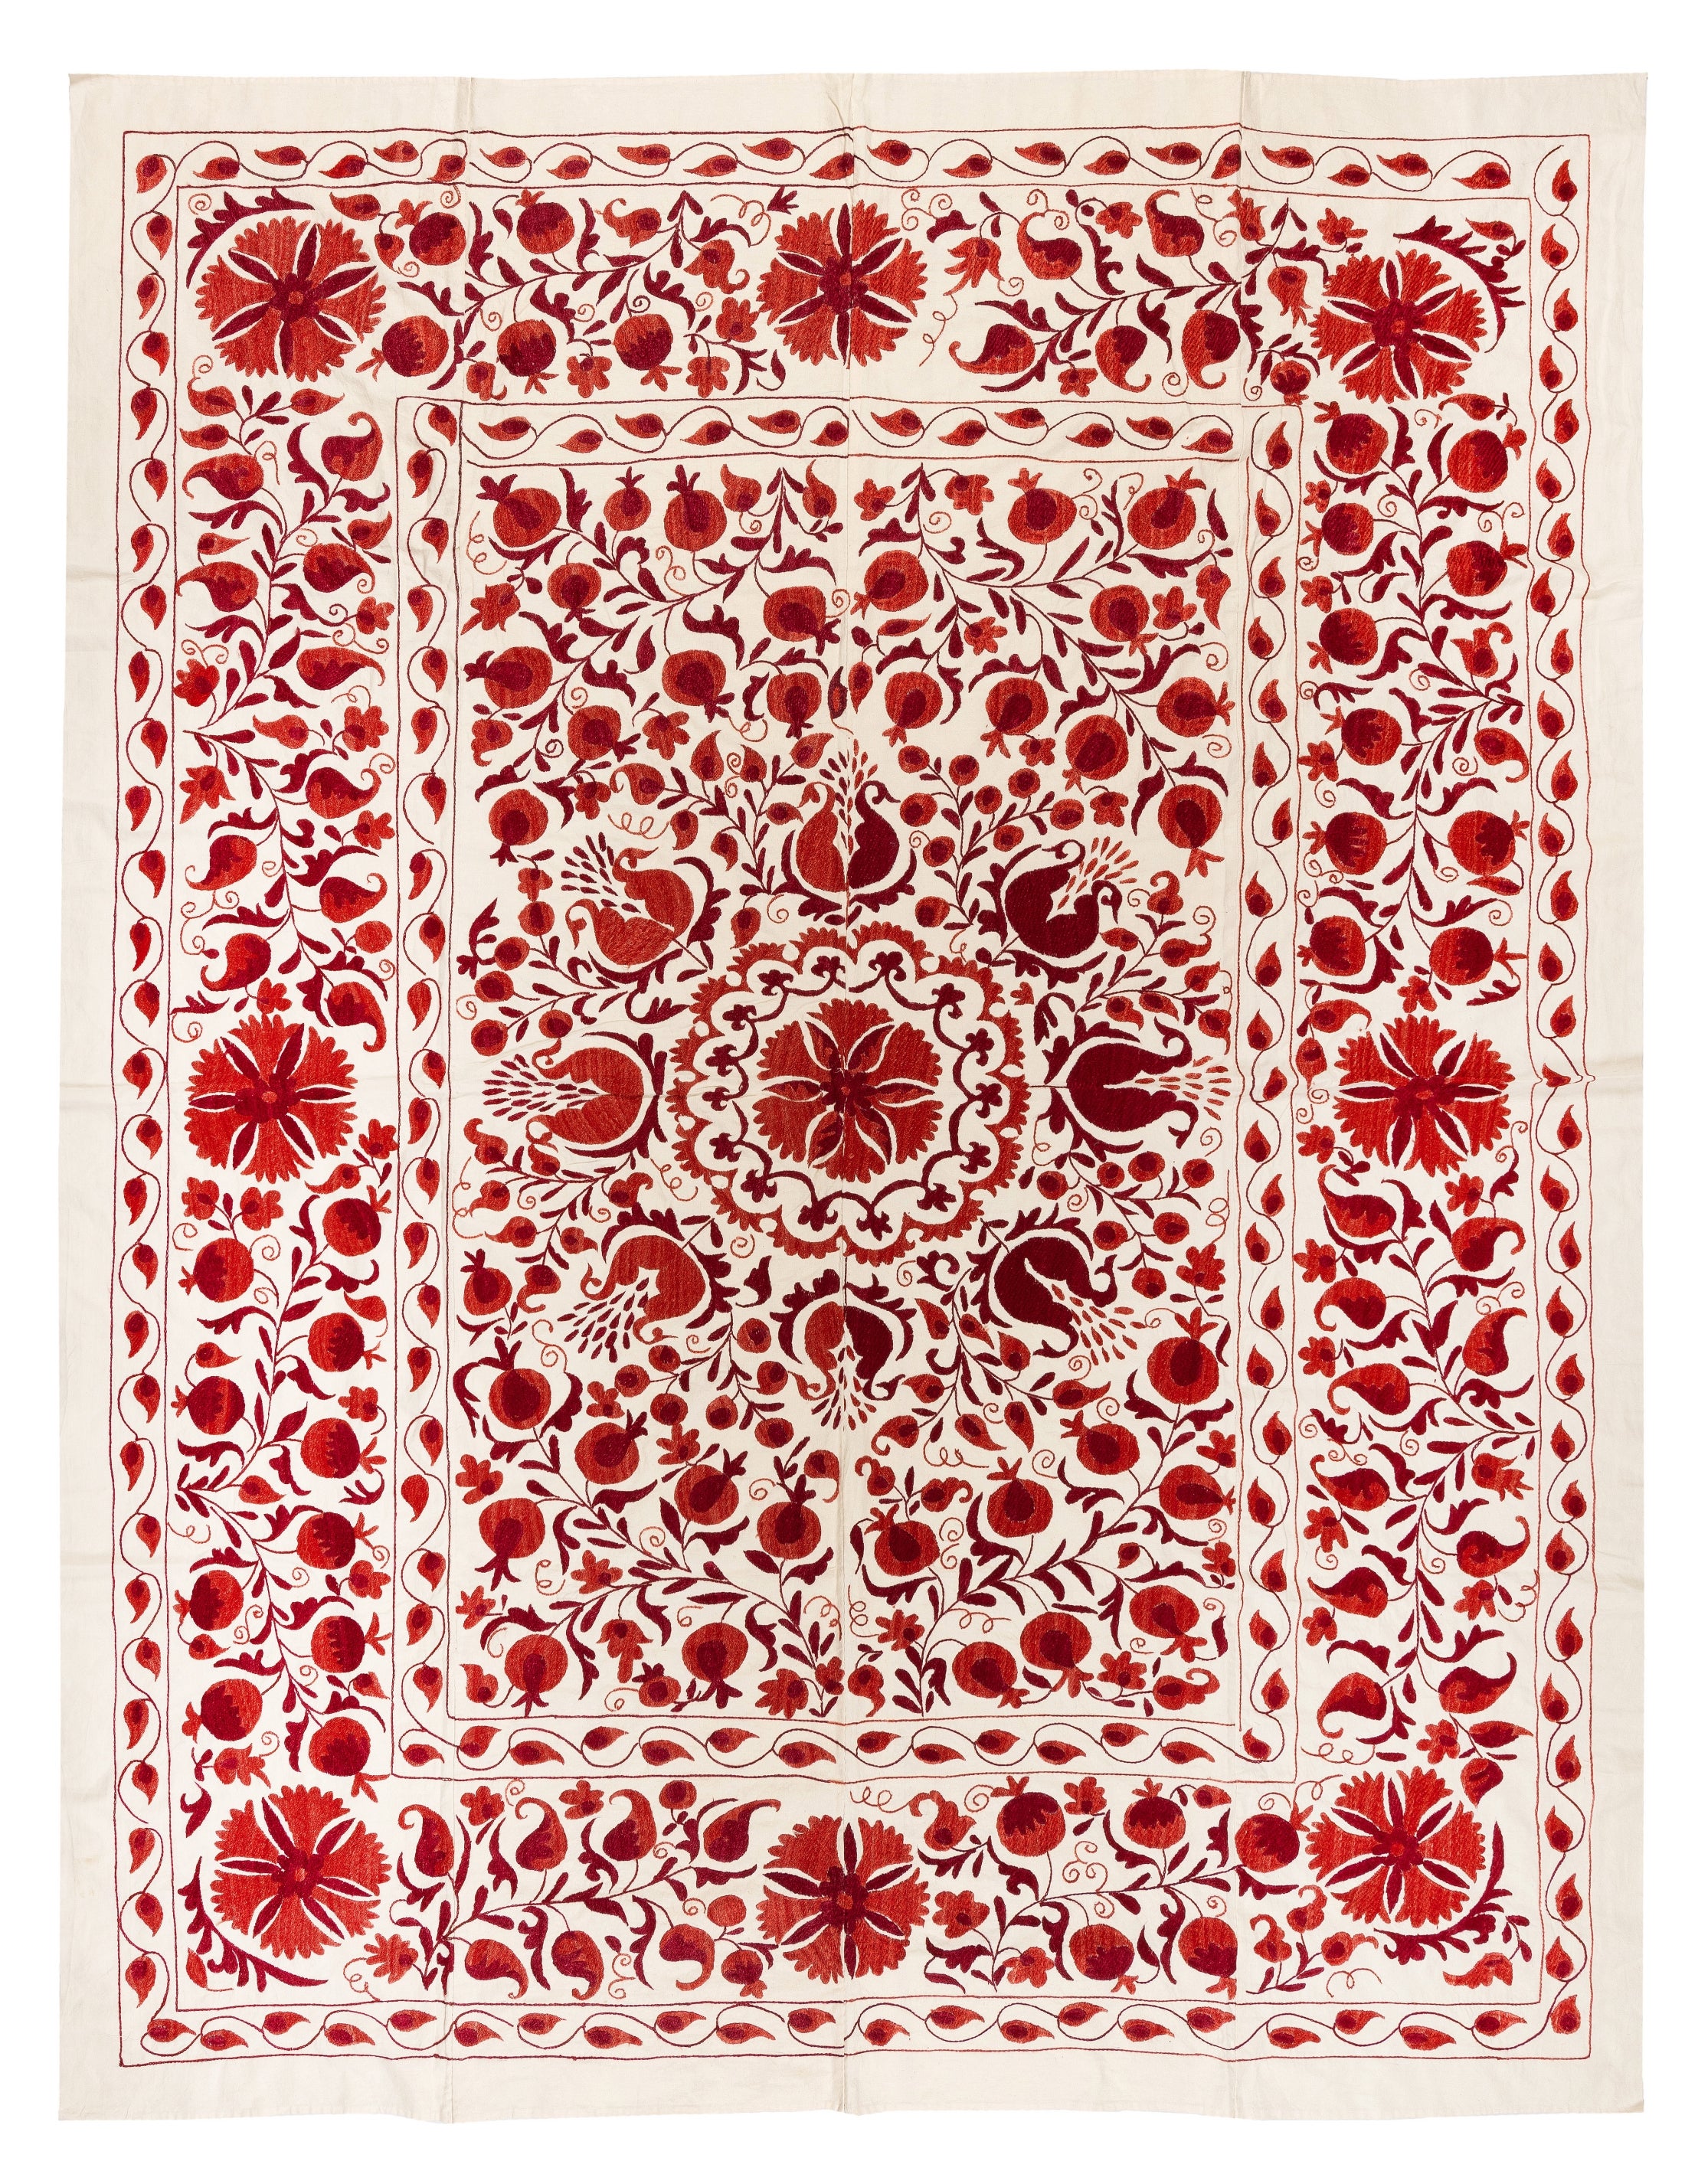 6.5x8 Ft Silk Wall Hanging in Red & Cream, Embroidered Bedspread, New Tablecloth For Sale